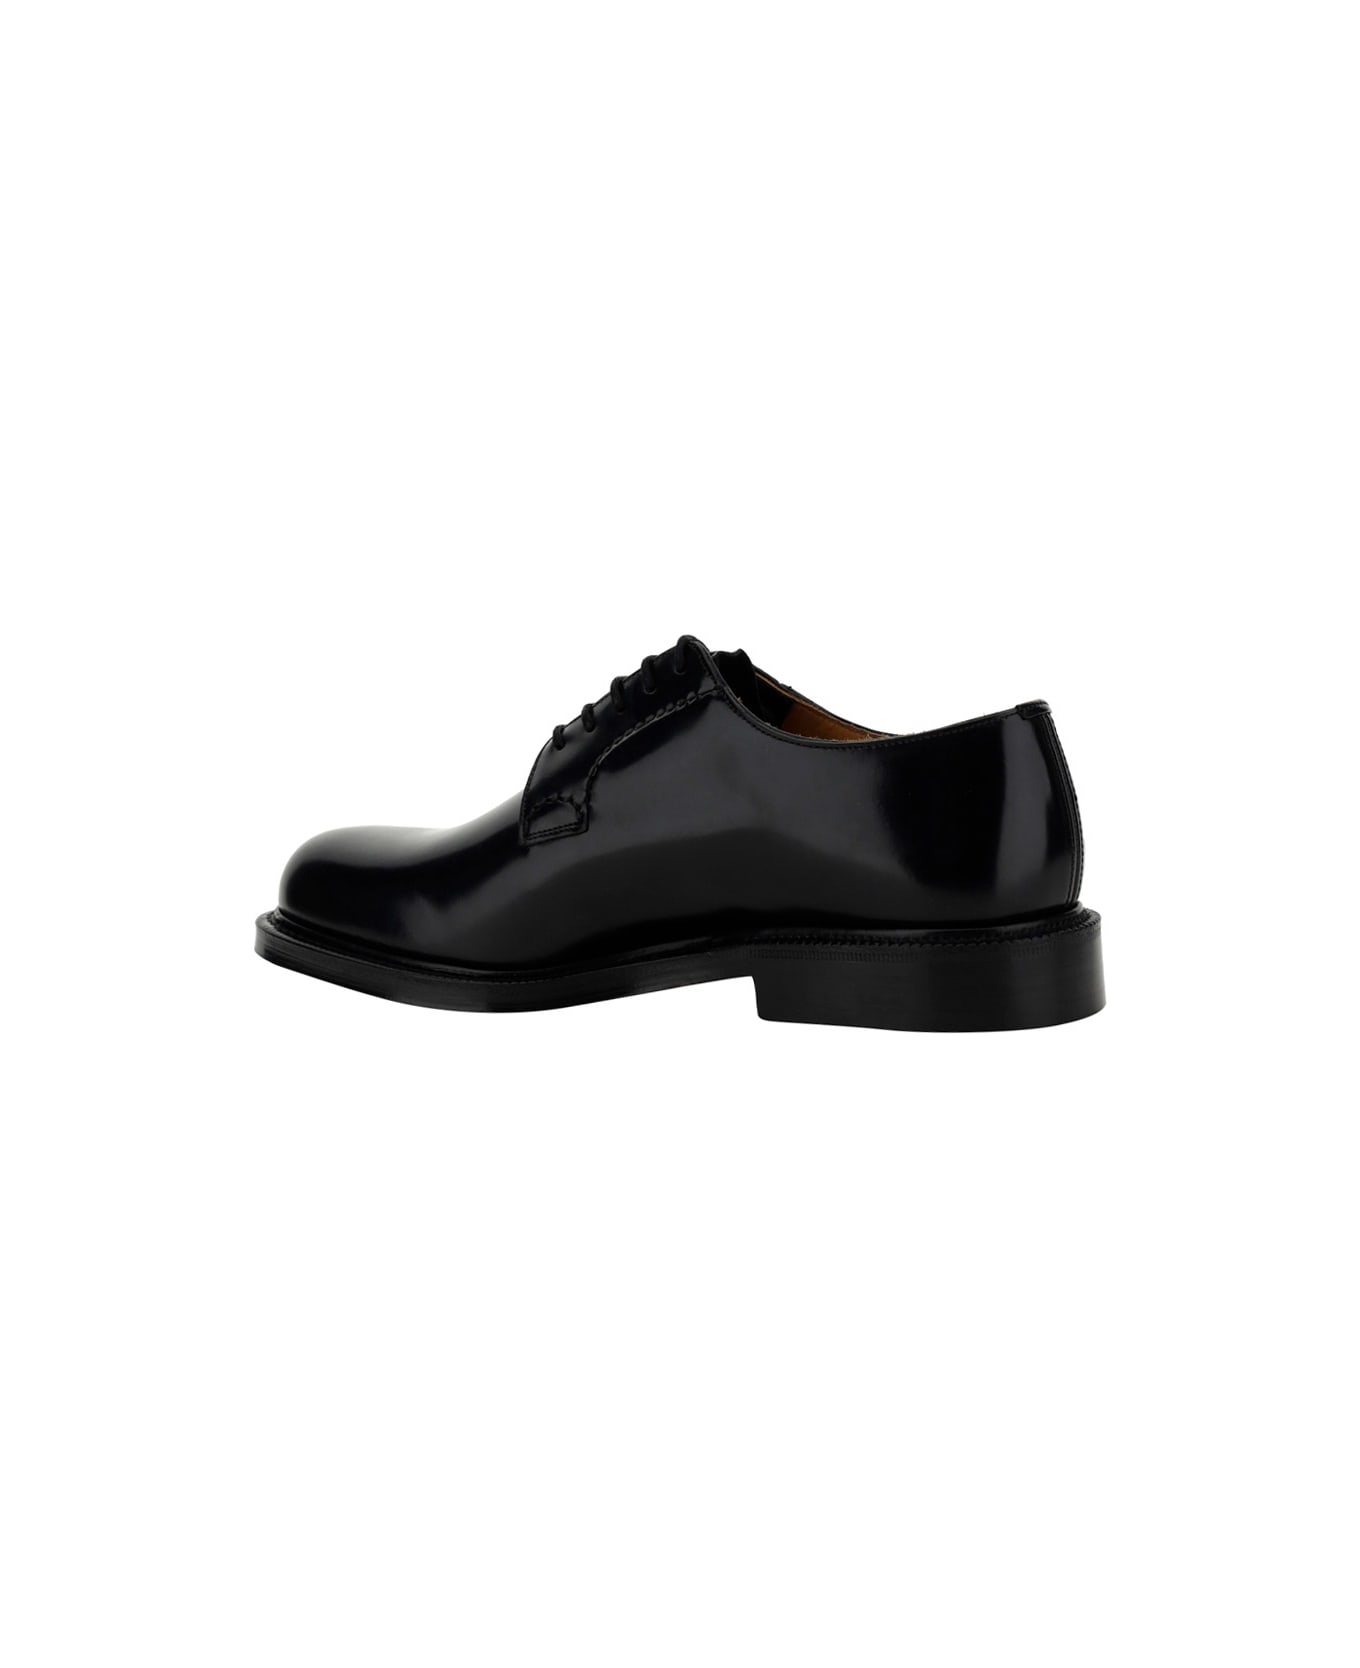 Church's Lace-up Shoes - Black ローファー＆デッキシューズ